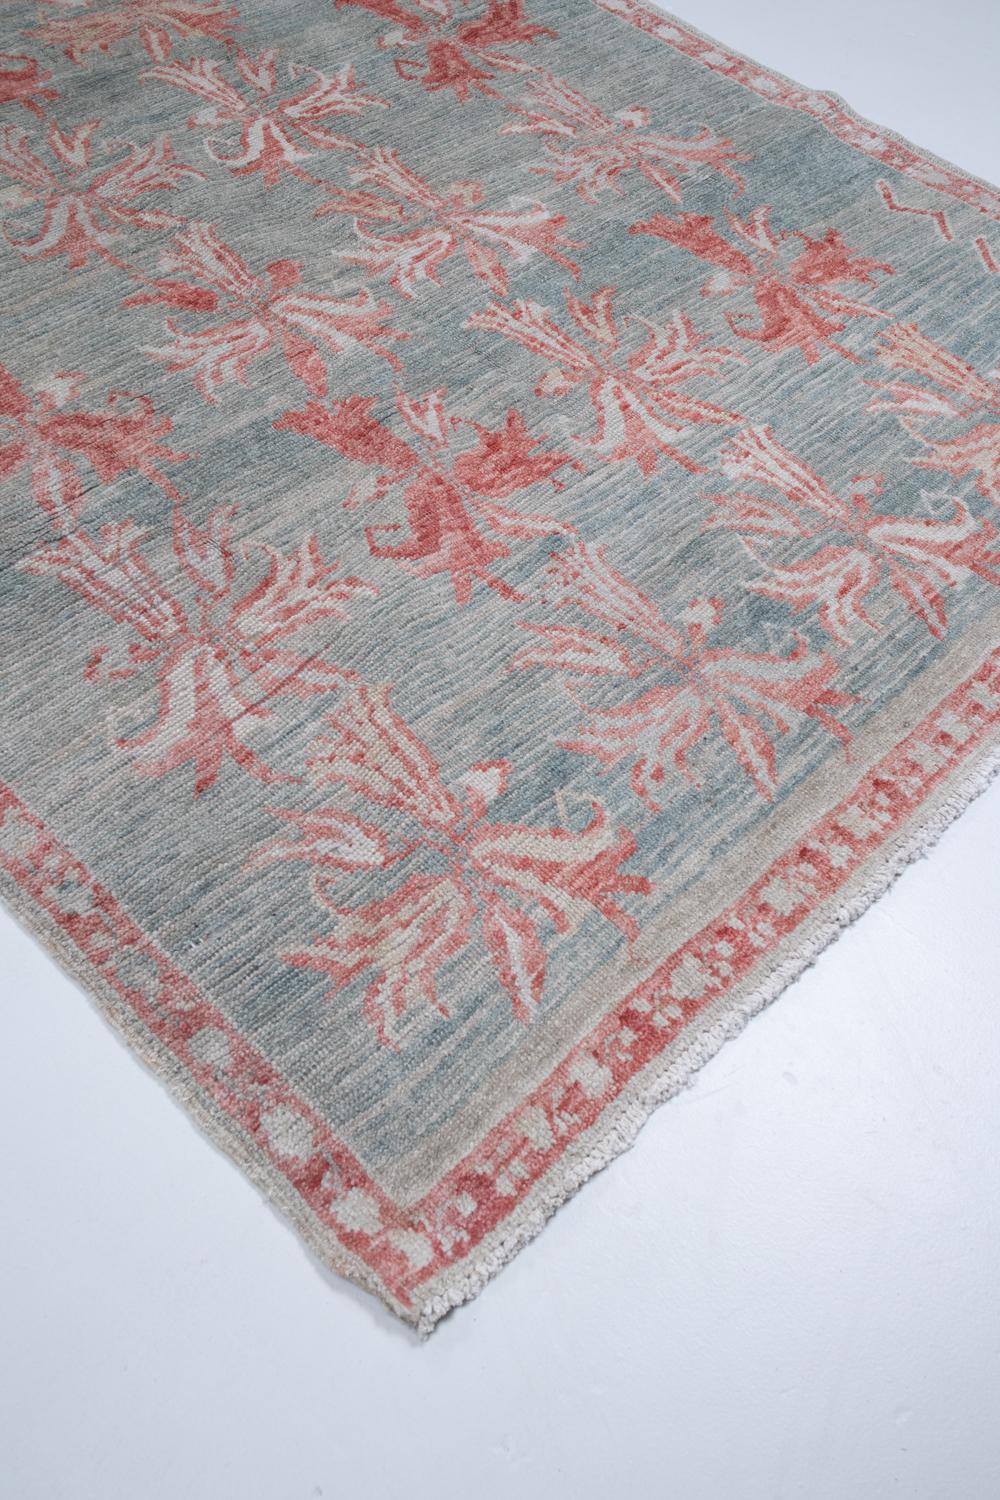 Vintage Vintage Art Deco Anatolian Rug In Good Condition For Sale In West Palm Beach, FL